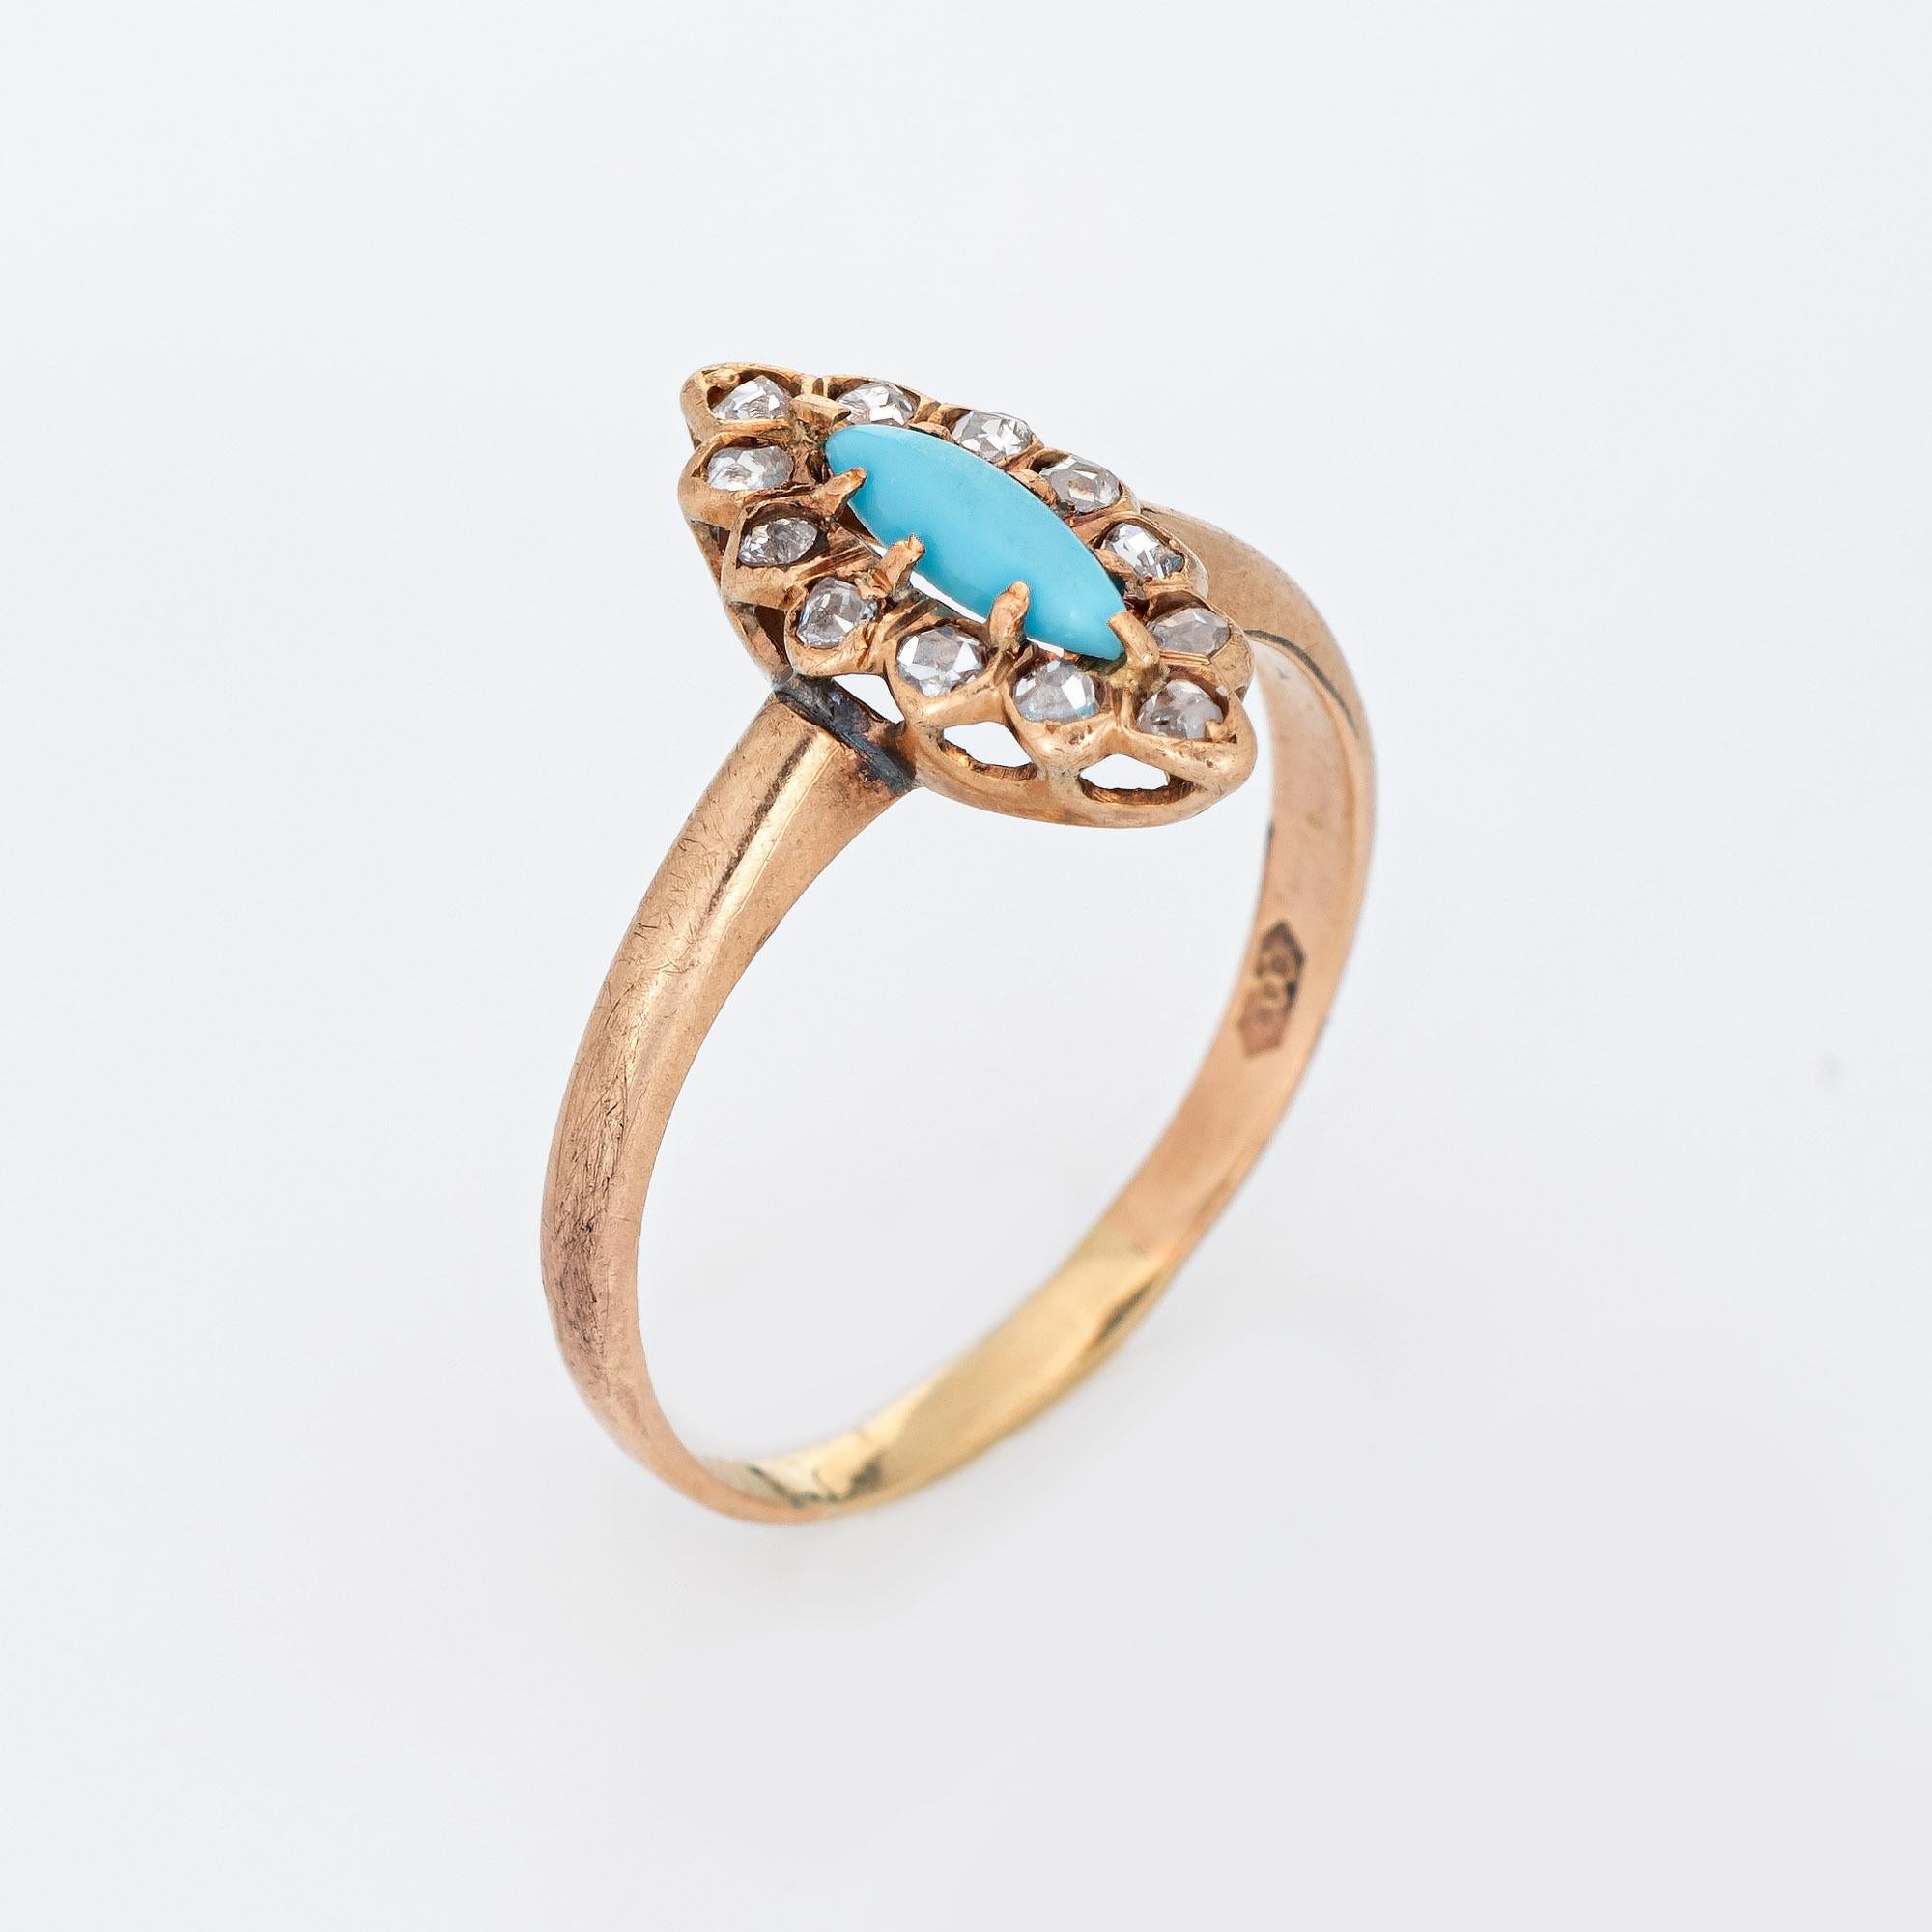 Finely detailed antique Victorian turquoise & diamond ring (circa 1880s to 1900s), crafted in 14k rose gold. 

Cabochon cut turquoise measures 8mm x 2.5mm (estimated at 0.25 carats). A total of 12 estimated 0.02 carat old rose cut diamonds total an